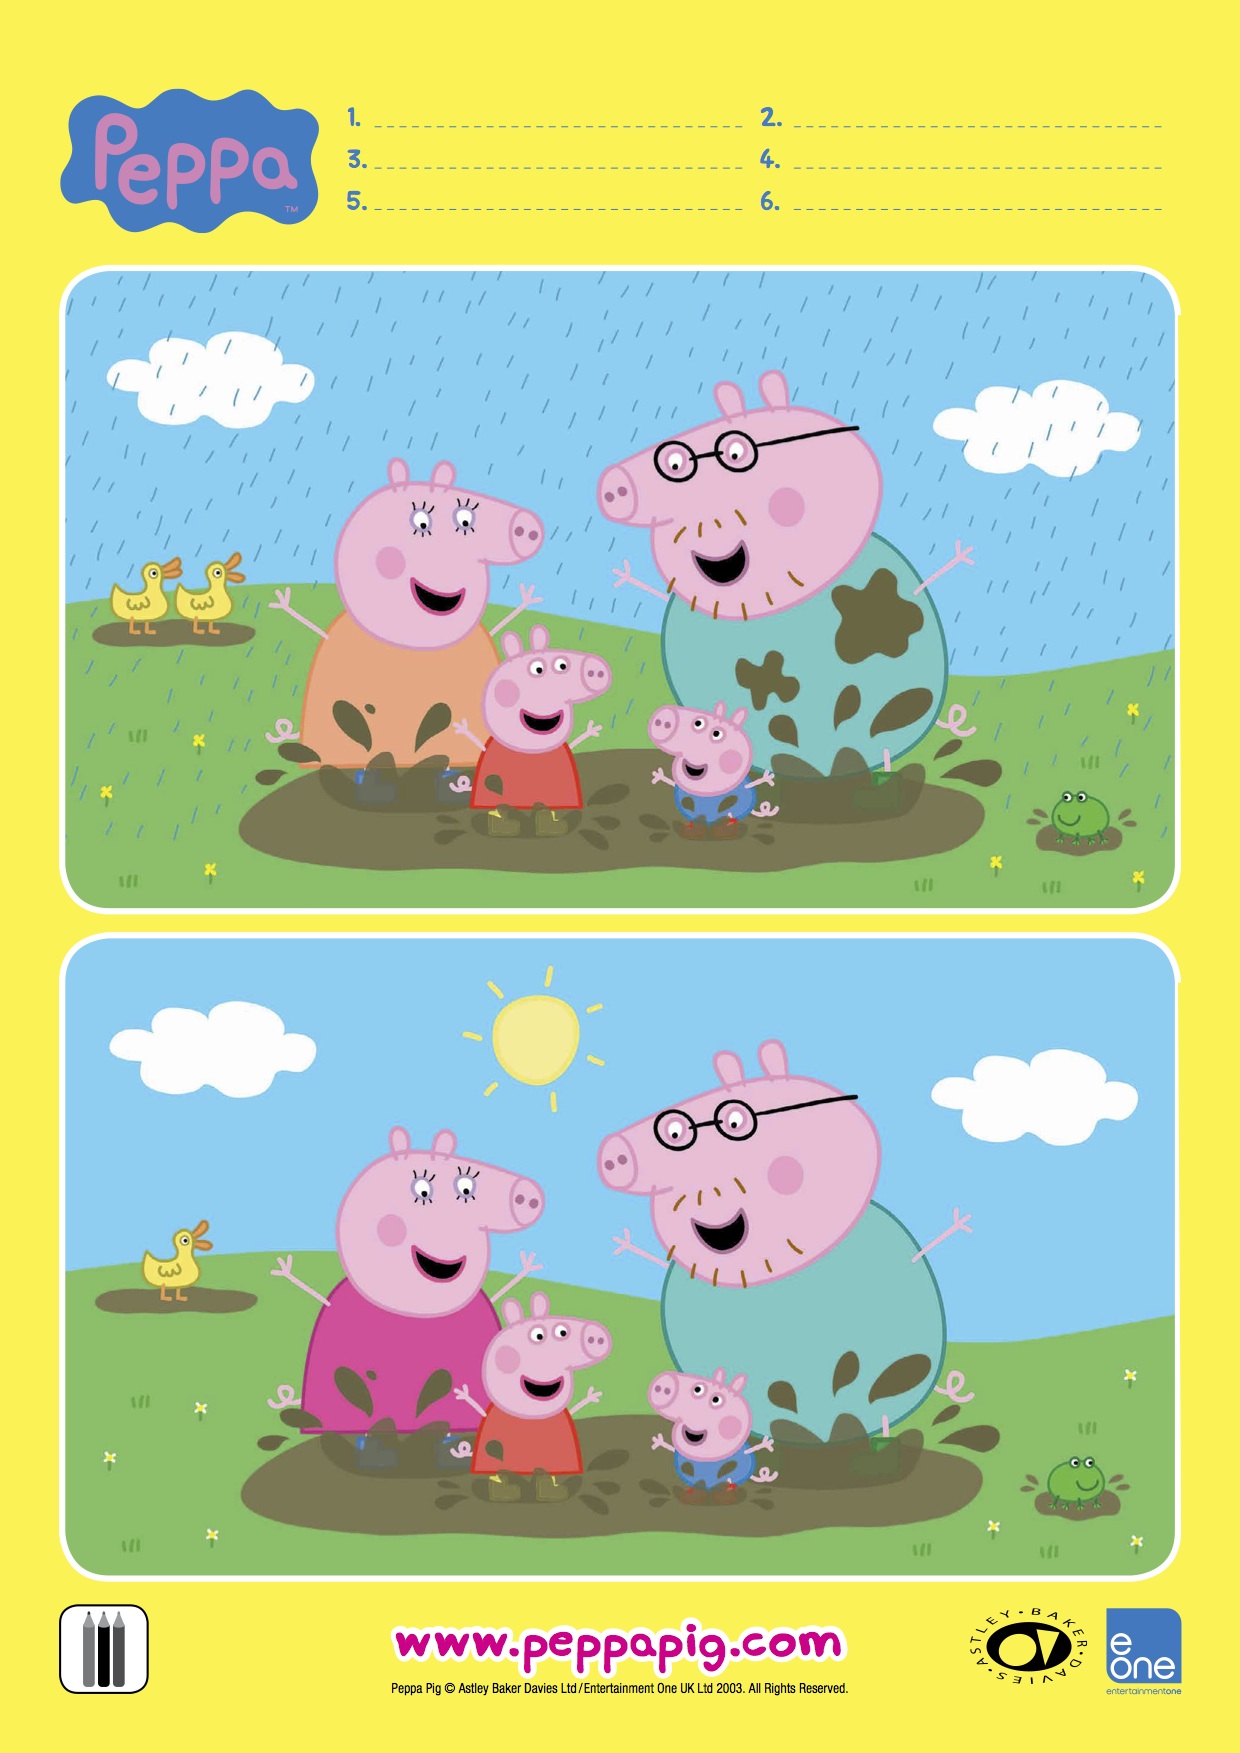 rainy-day-activities-download-these-free-peppa-pig-activity-sheets